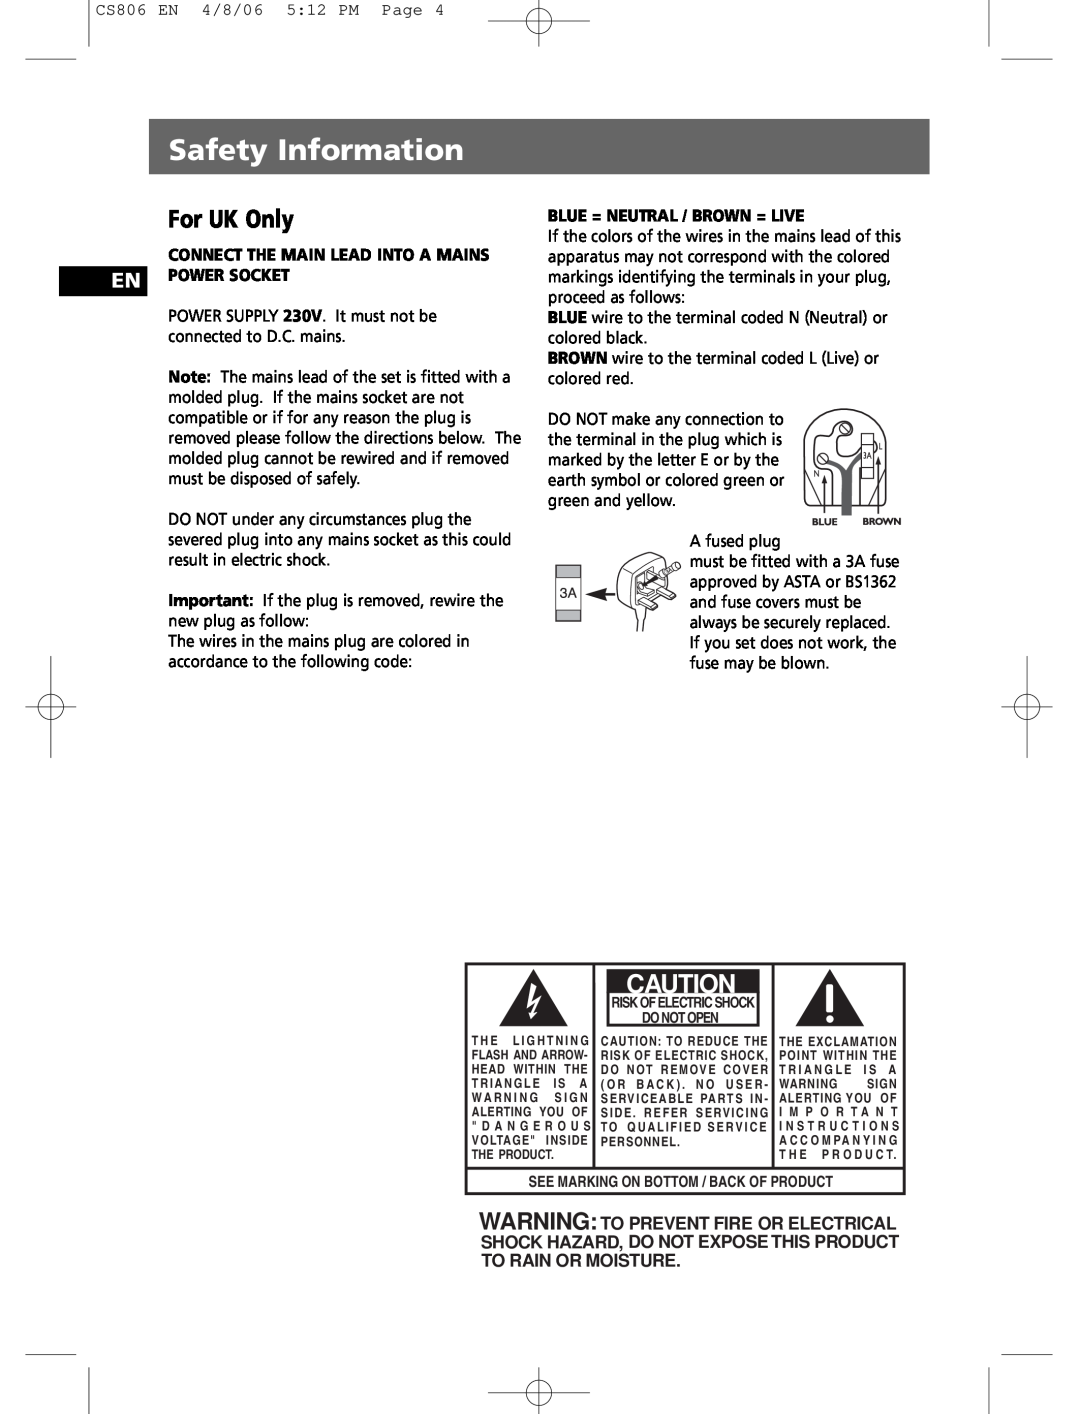 Technicolor - Thomson CS806 user manual Safety Information, For UK Only 